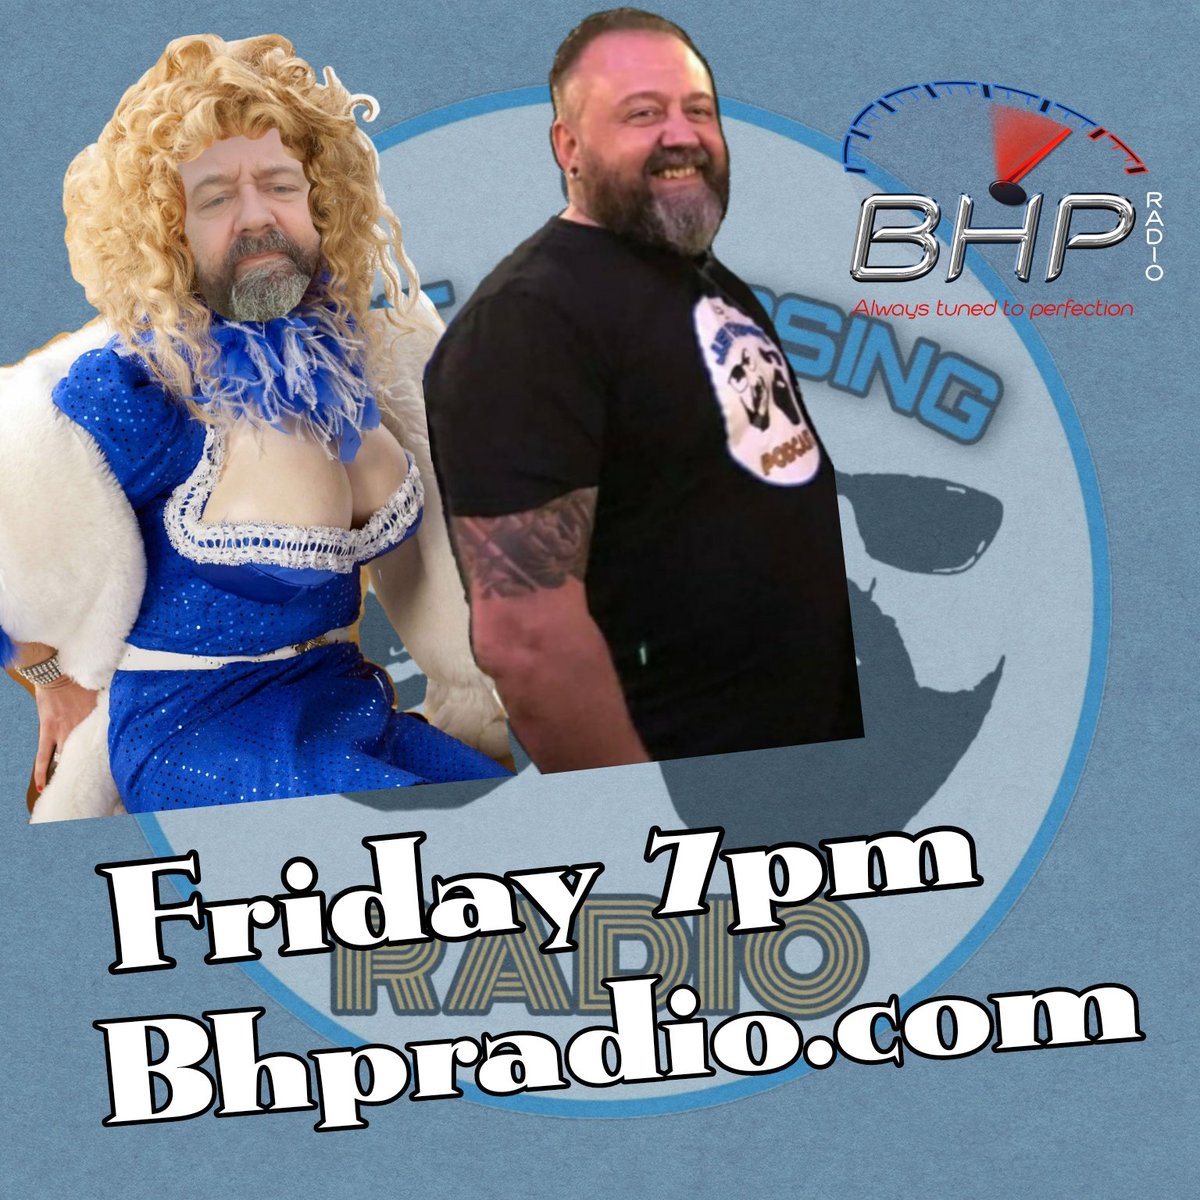 The lady and the trans are back for another hilarious show on @BhpRadio at 7pm. Be there or be square.